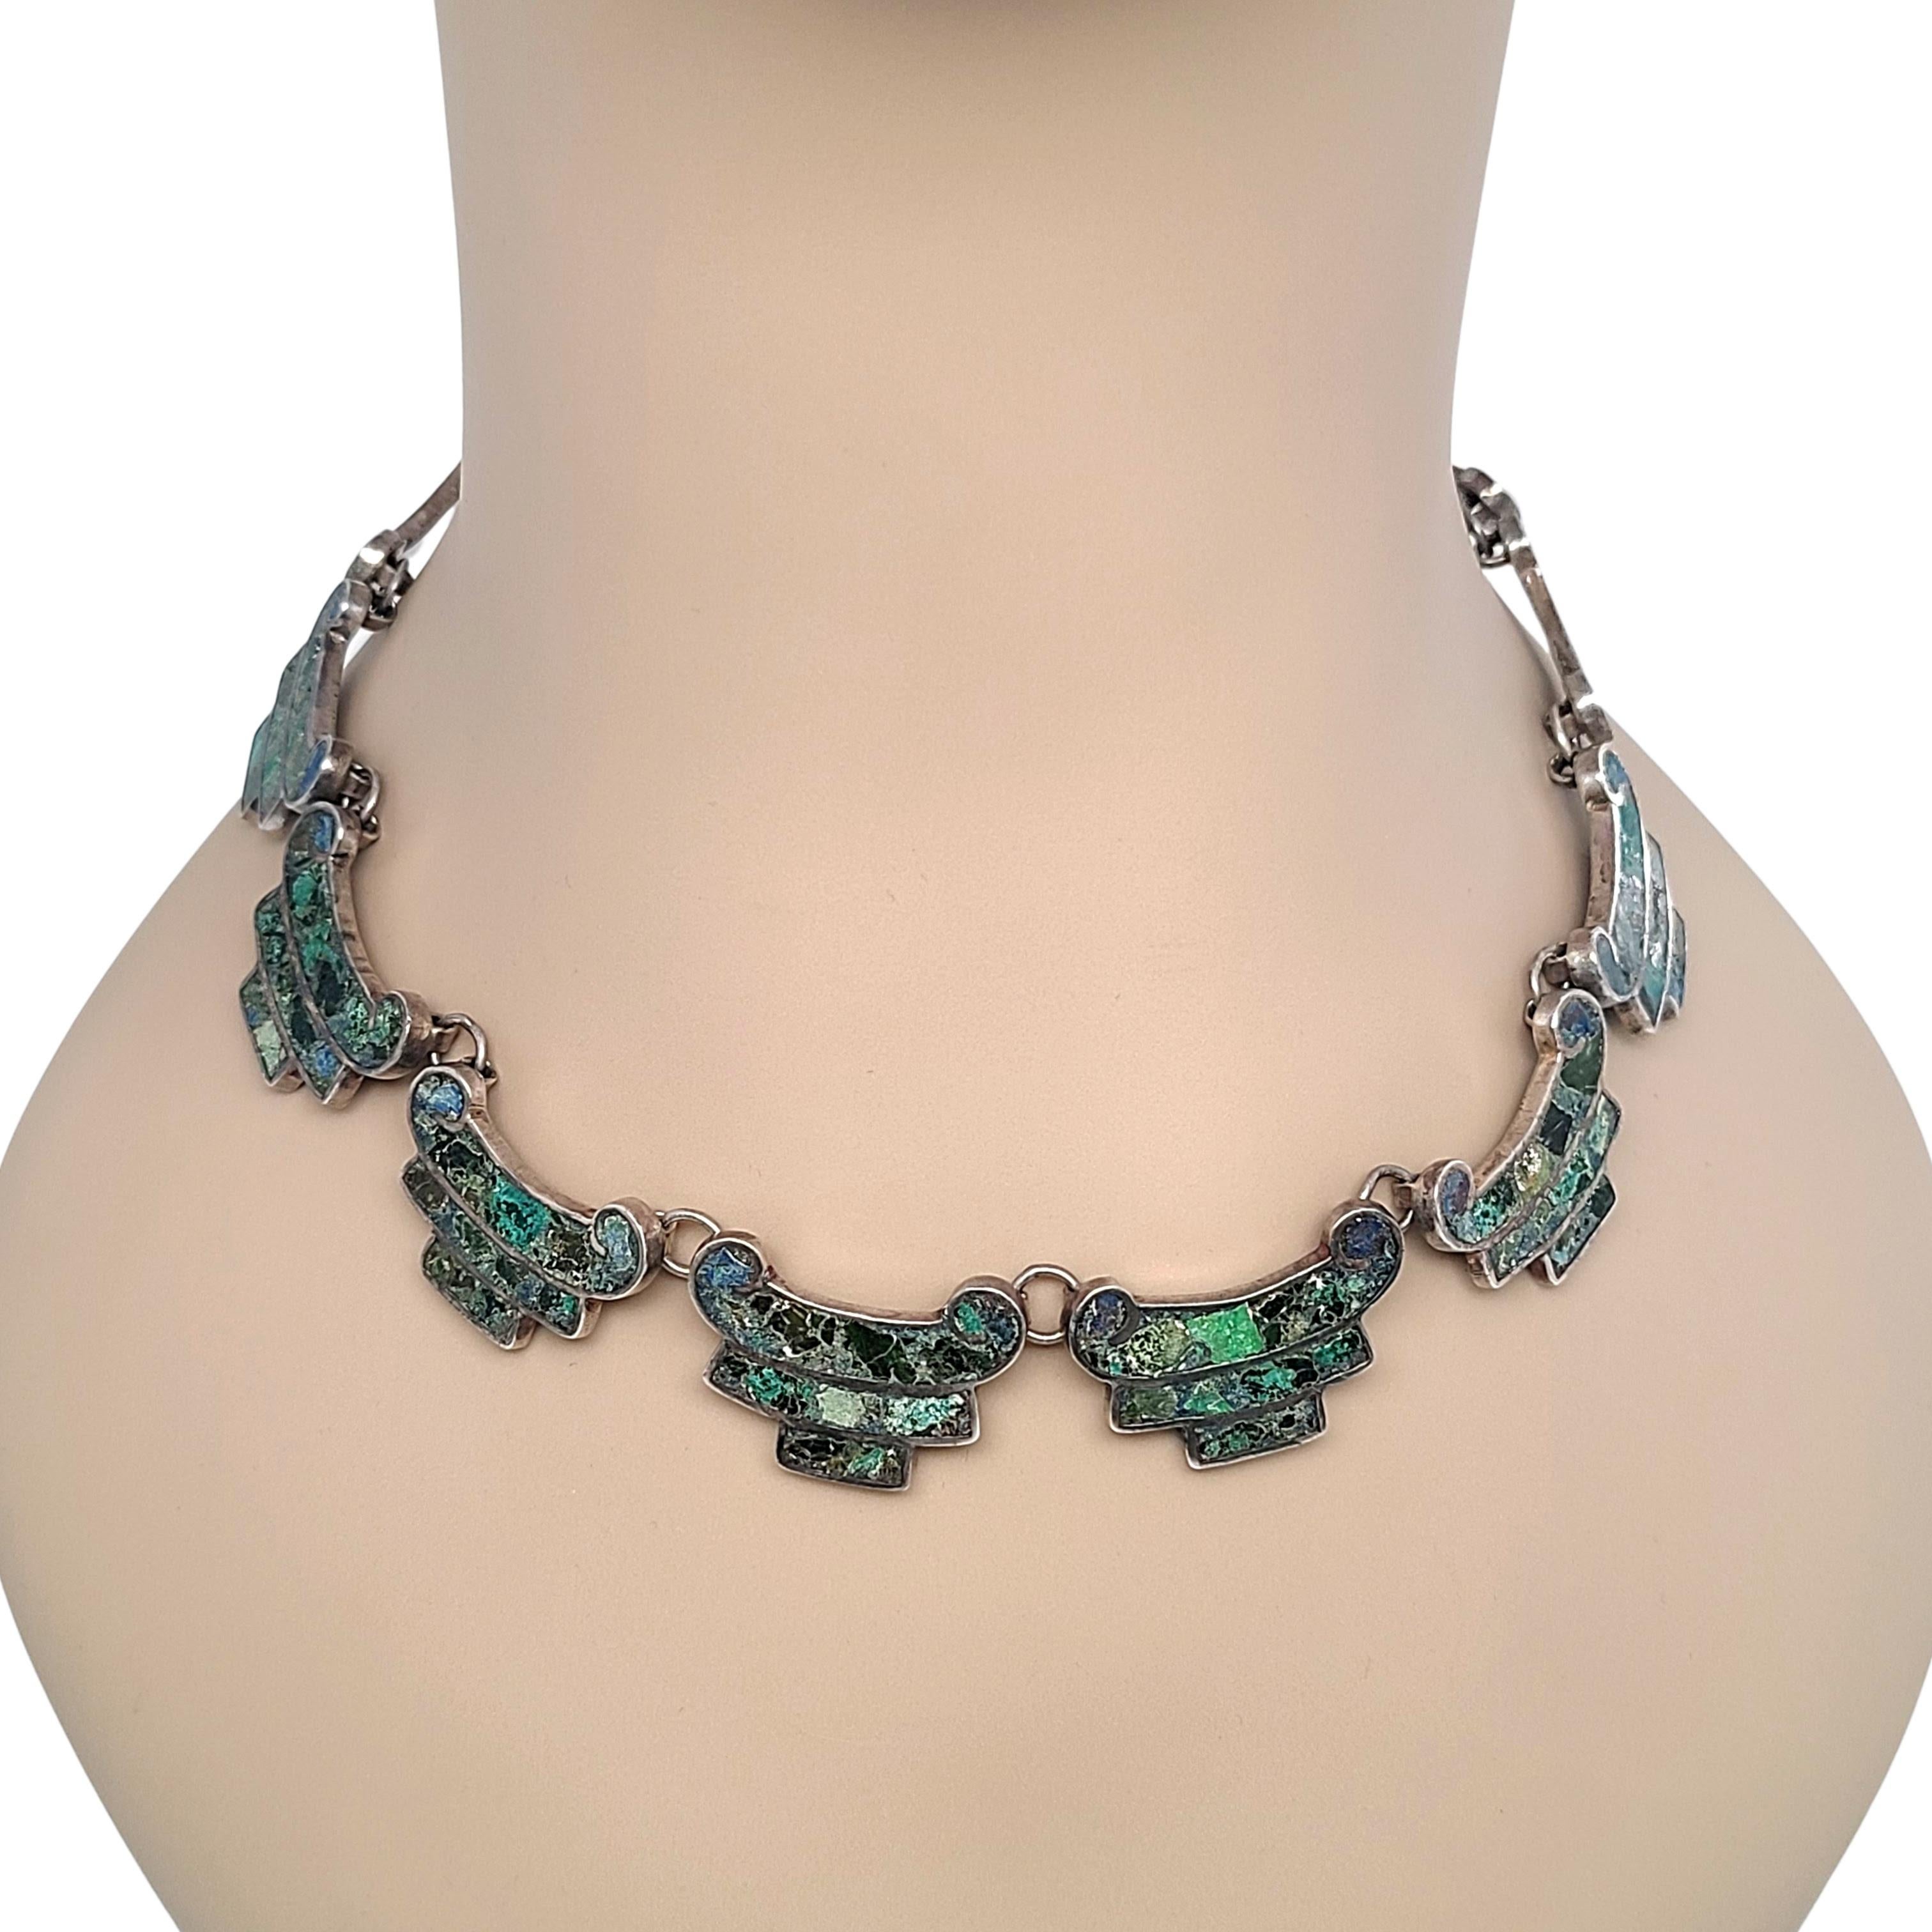 Women's Taxco Mexico Sterling Silver Crushed Turquoise Choker Necklace For Sale